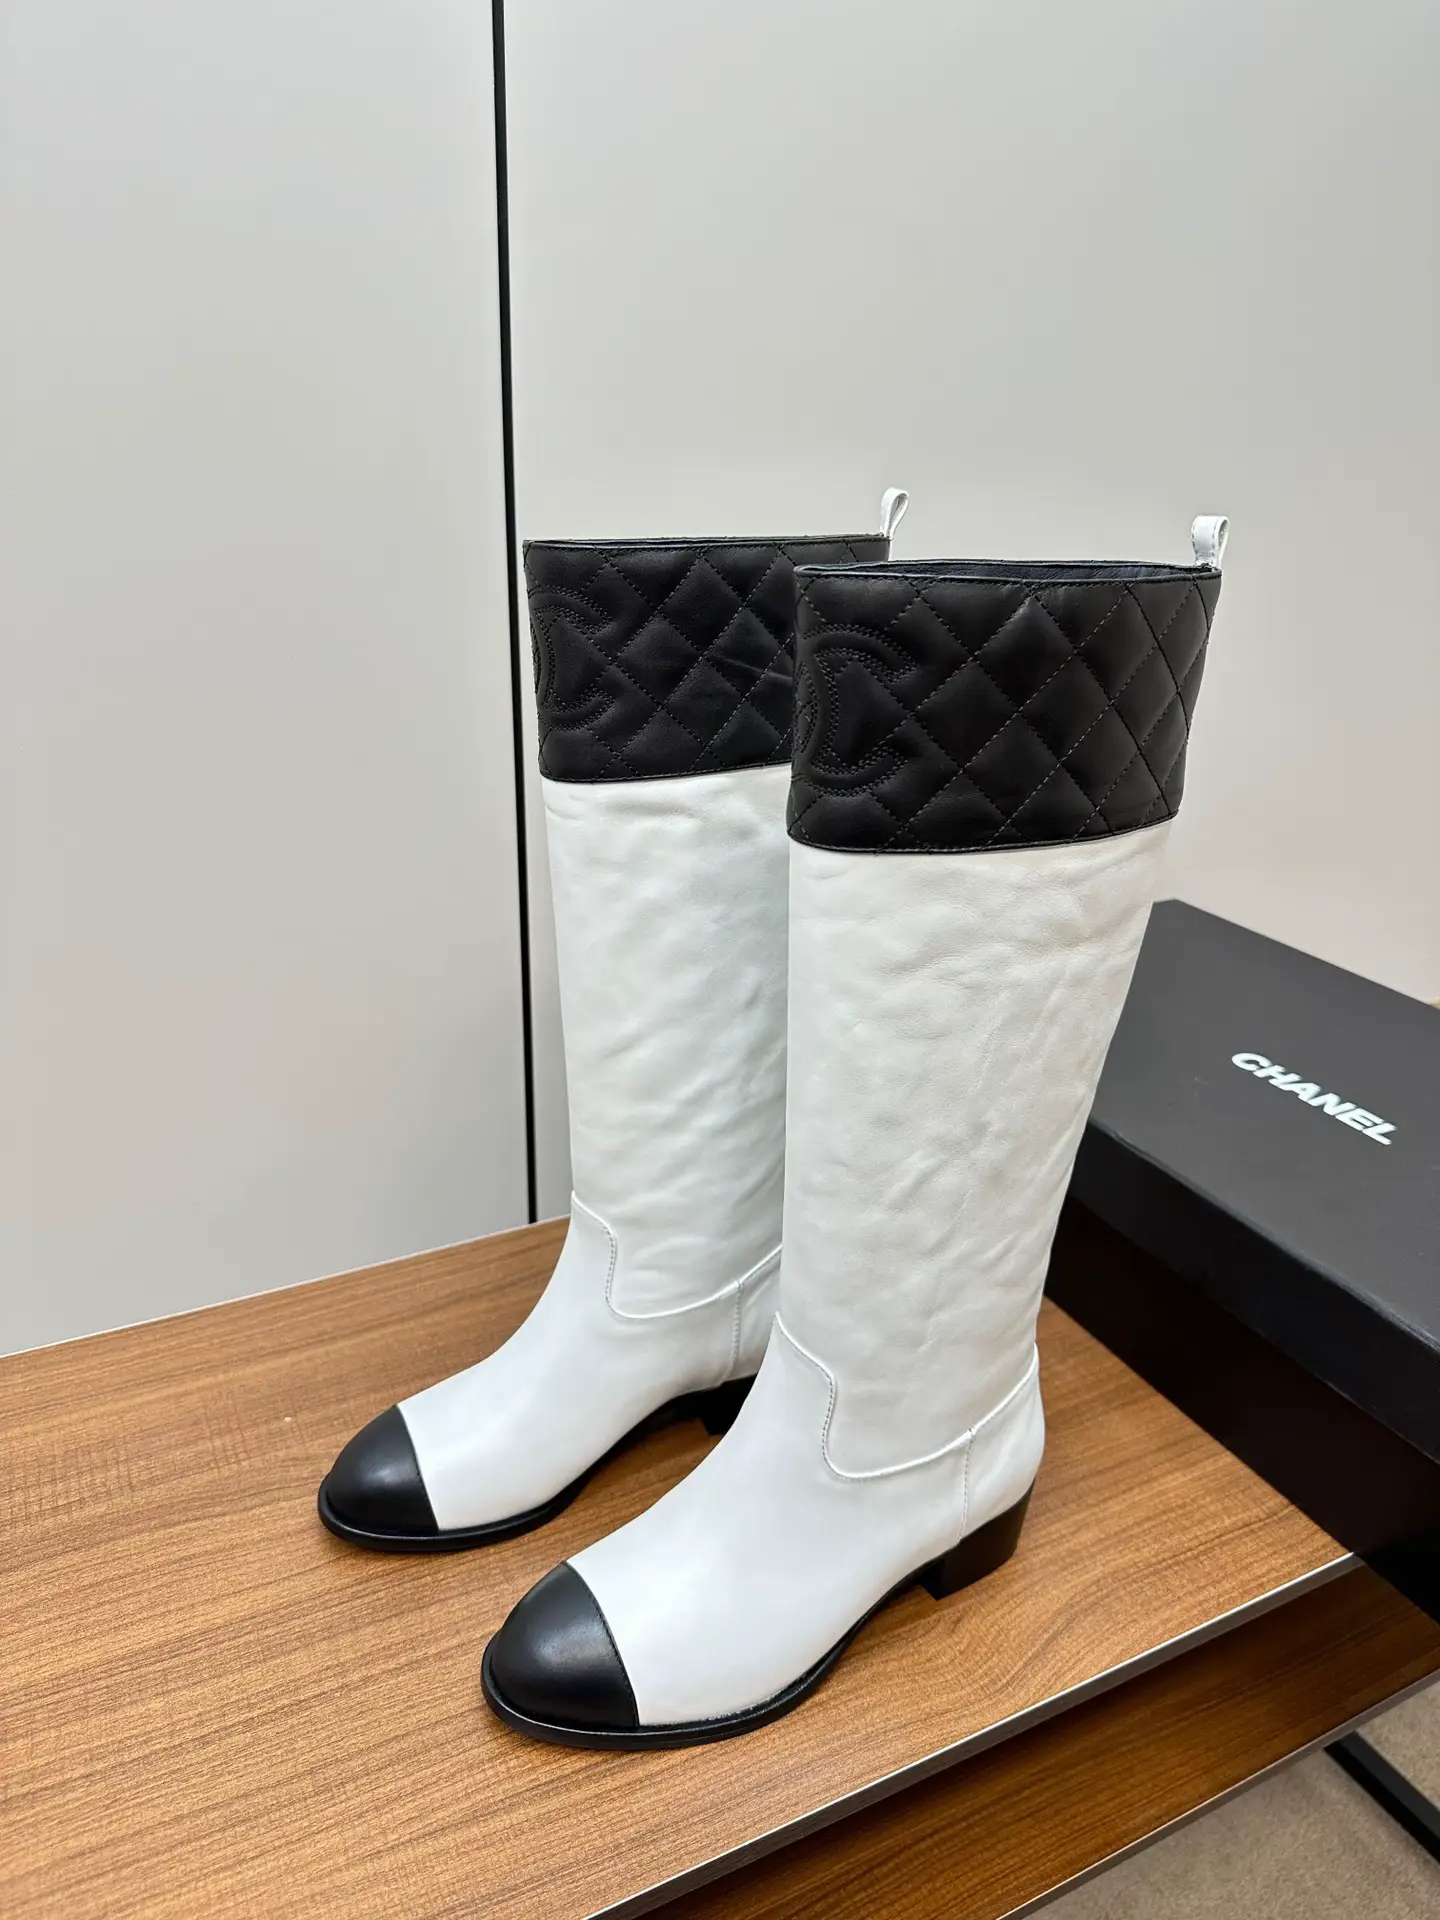 Chanel Boots, Gallery posted by Youngrichco